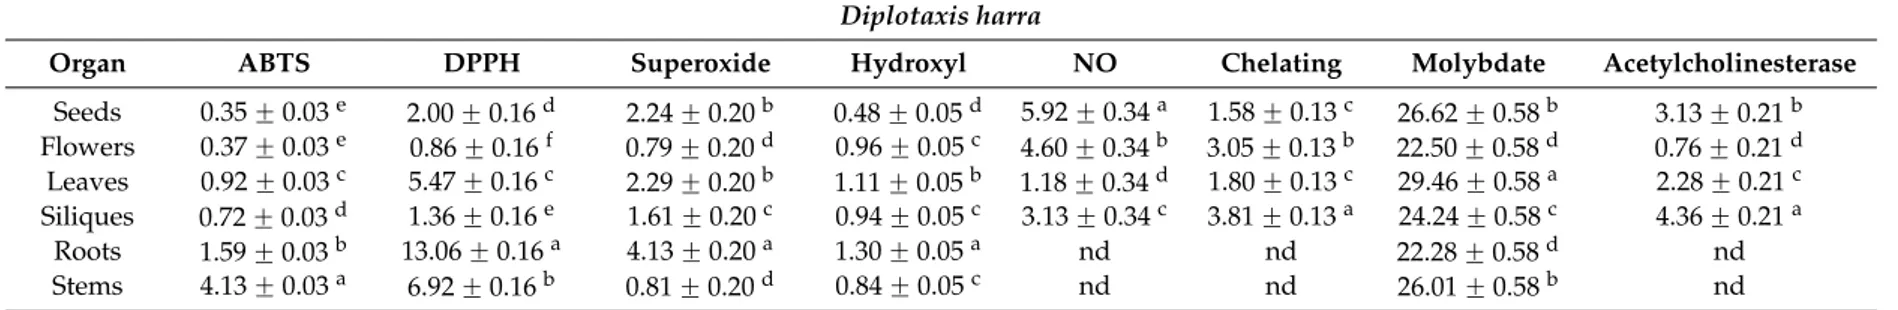 Table 3. Antioxidant activities of plant extracts of D. harra expressed in IC 50 (mg/mL) for ABTS, DPPH, superoxide, hydroxyl and NO scavenging activities, chelating activity and acetylcholinesterase inhibitor activity